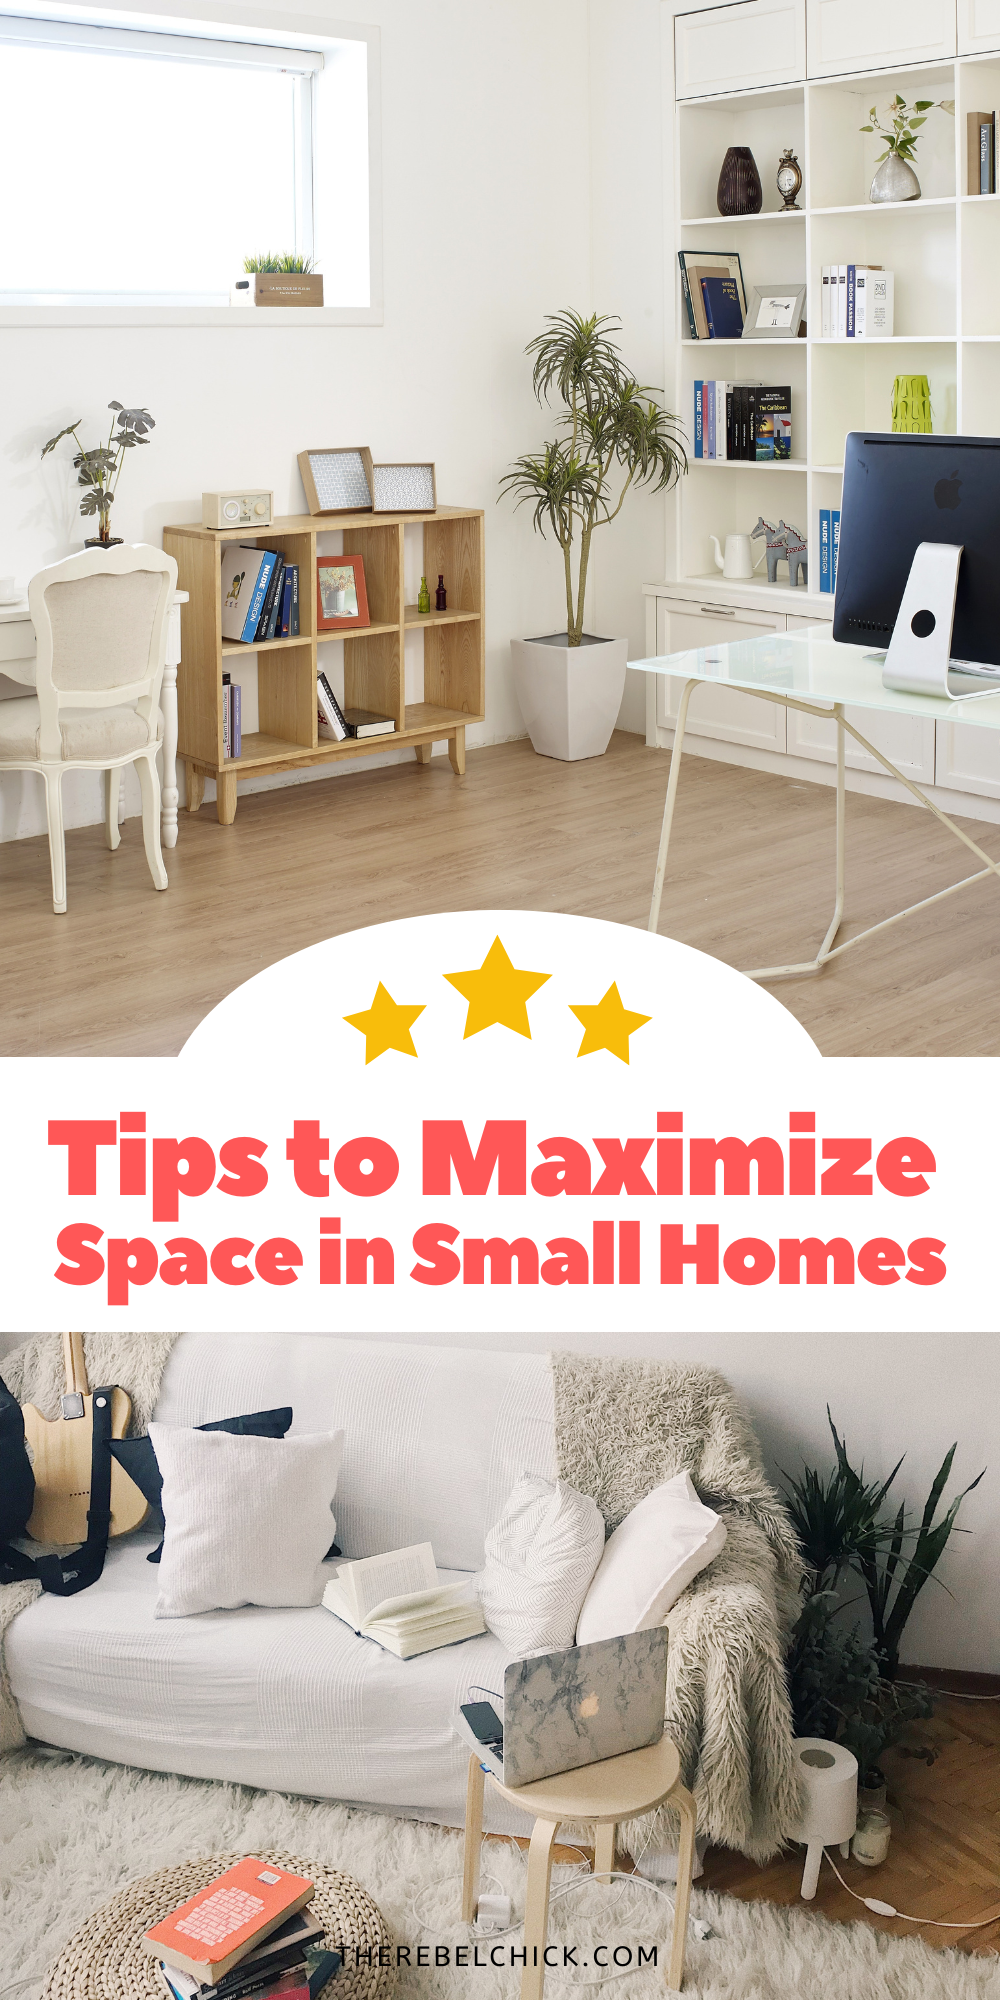 Tips to Maximize Space in Small Homes